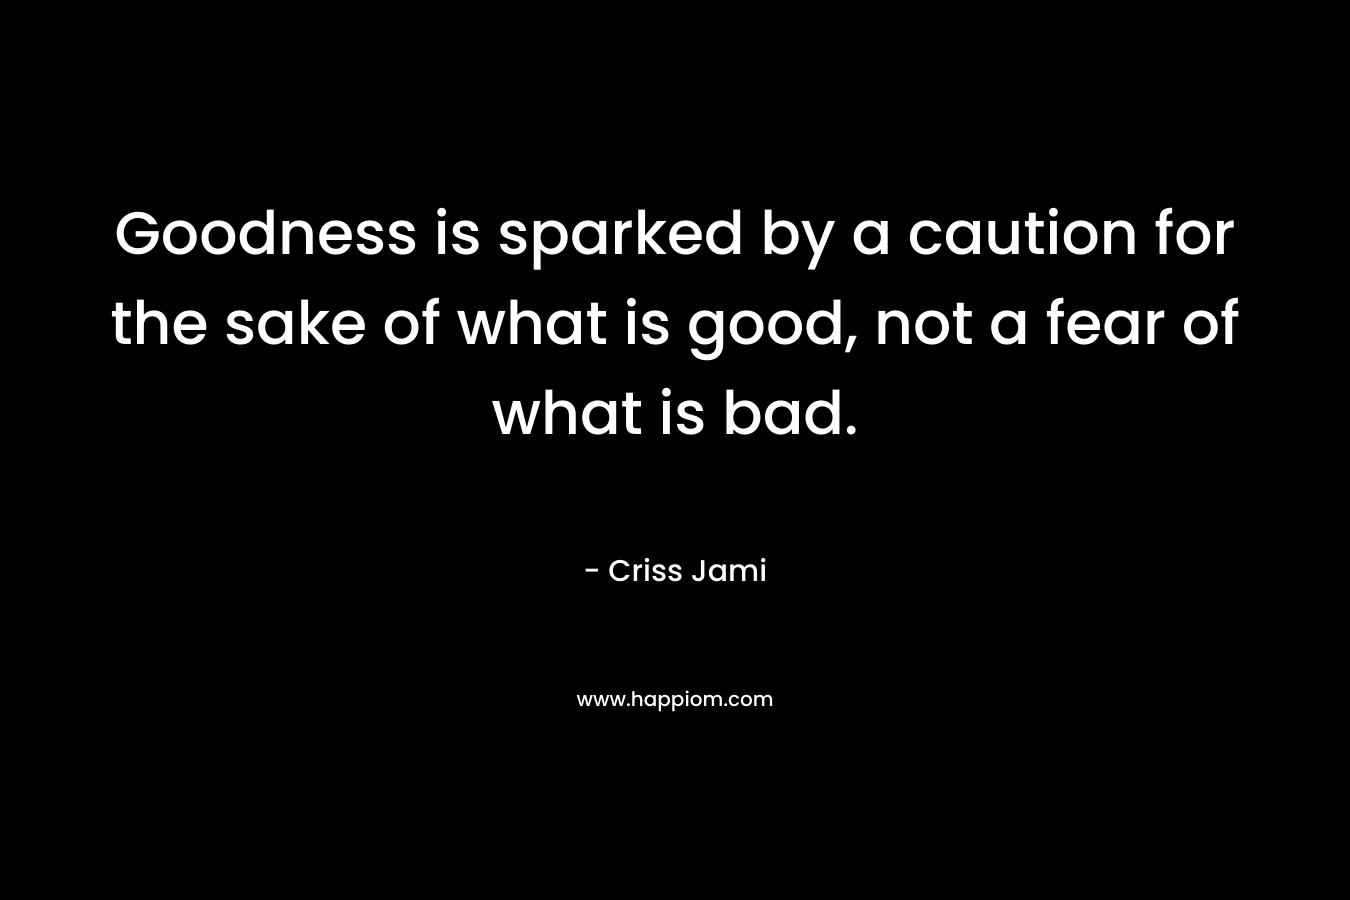 Goodness is sparked by a caution for the sake of what is good, not a fear of what is bad. – Criss Jami